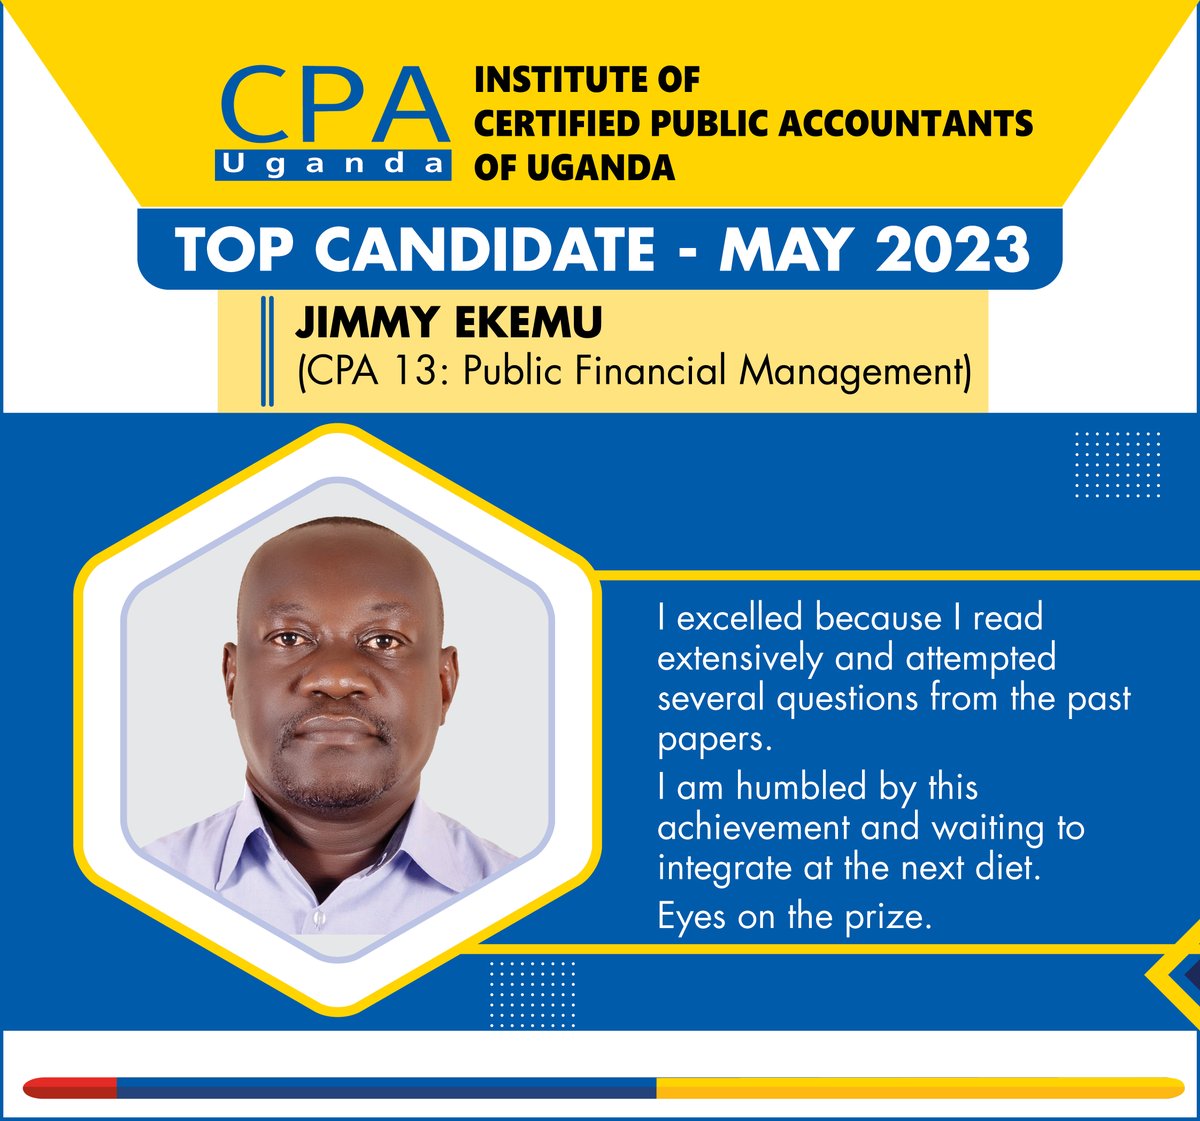 May 2023 ICPAU exam top candidates testimony.🎆 🎉 Let's celebrate an outstanding achiever! Hats off to Jimmy Ekemu, who clinched the title of Best Student in CPA Paper 13 - PFM during the May 2023 exams diet #WeCreateImpact #ICPAUStudents @JimmyEkemu